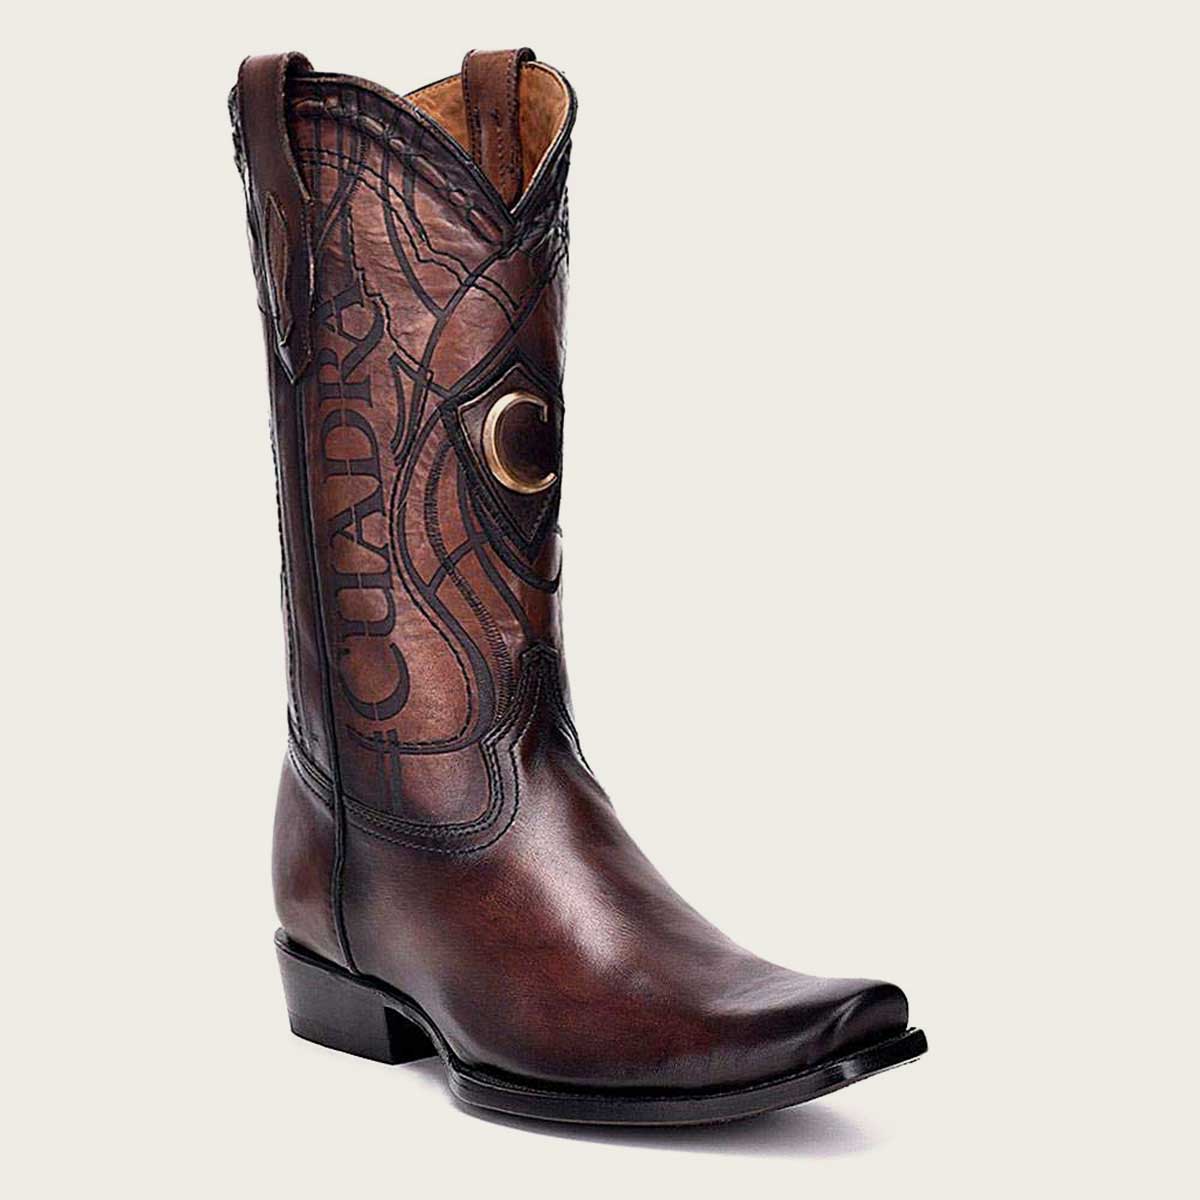 Introducing the exquisite Cuadra Men's Bovine Leather Cowboy Boot, a luxurious choice for contemporary cowboys seeking both style and comfort